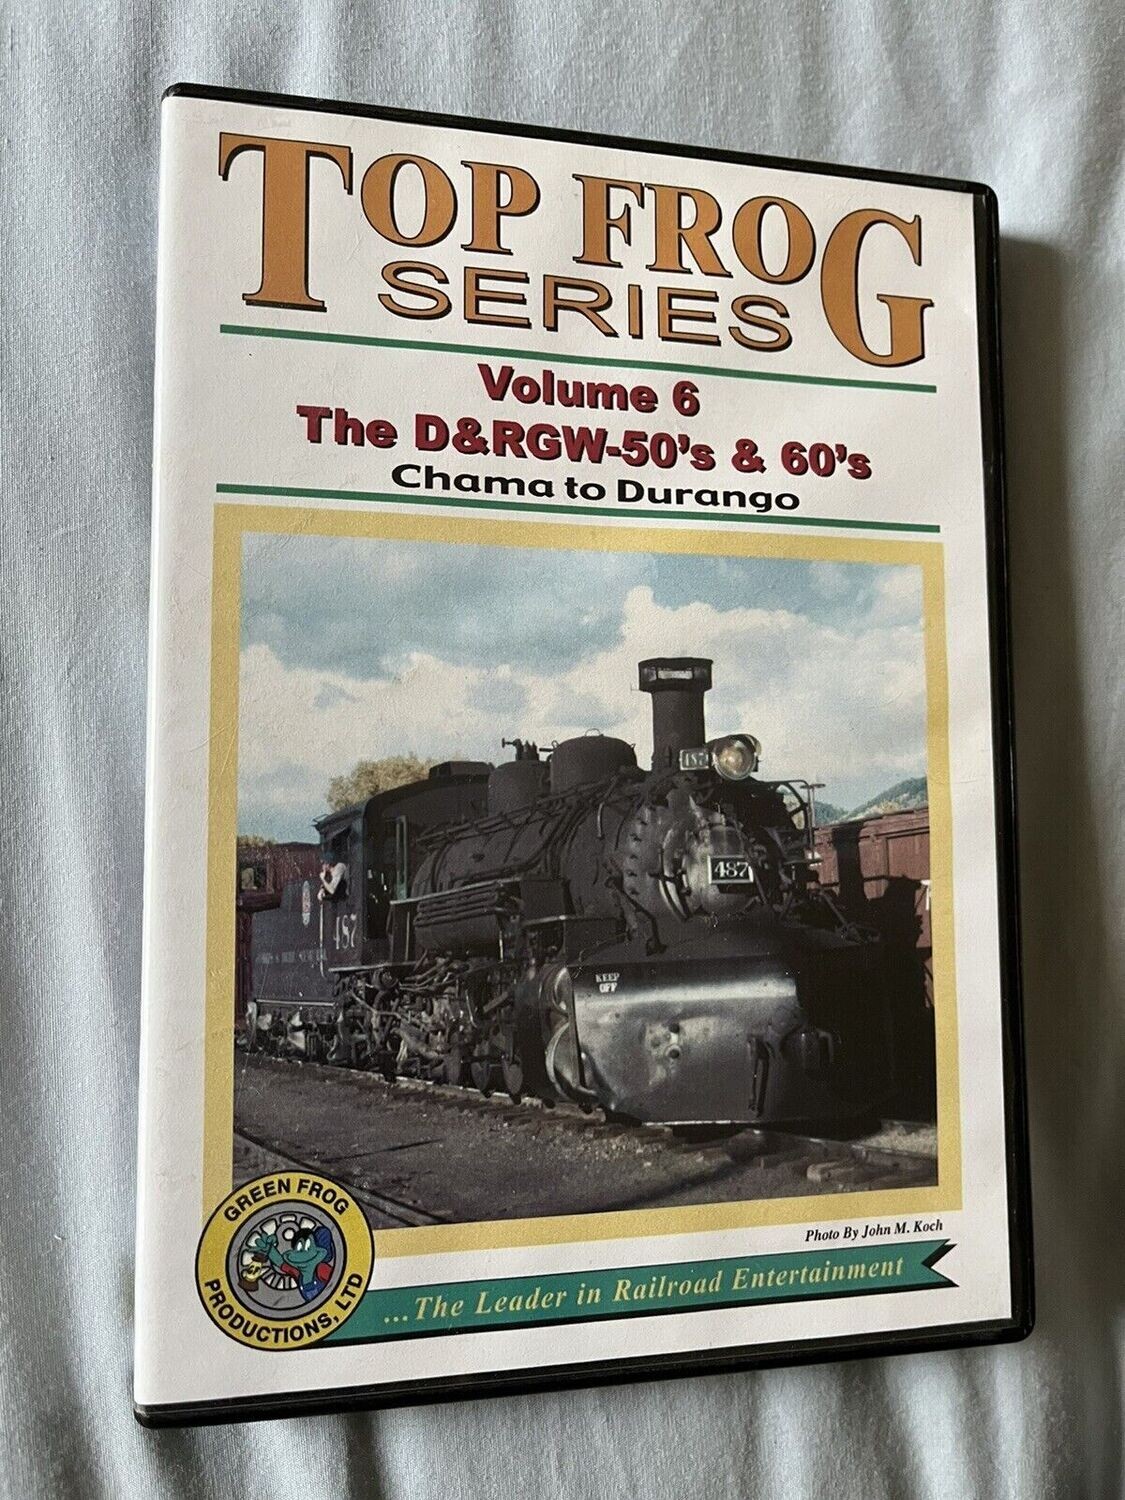 Top Frog Volume 6 The D&RGW - 50's & 60's